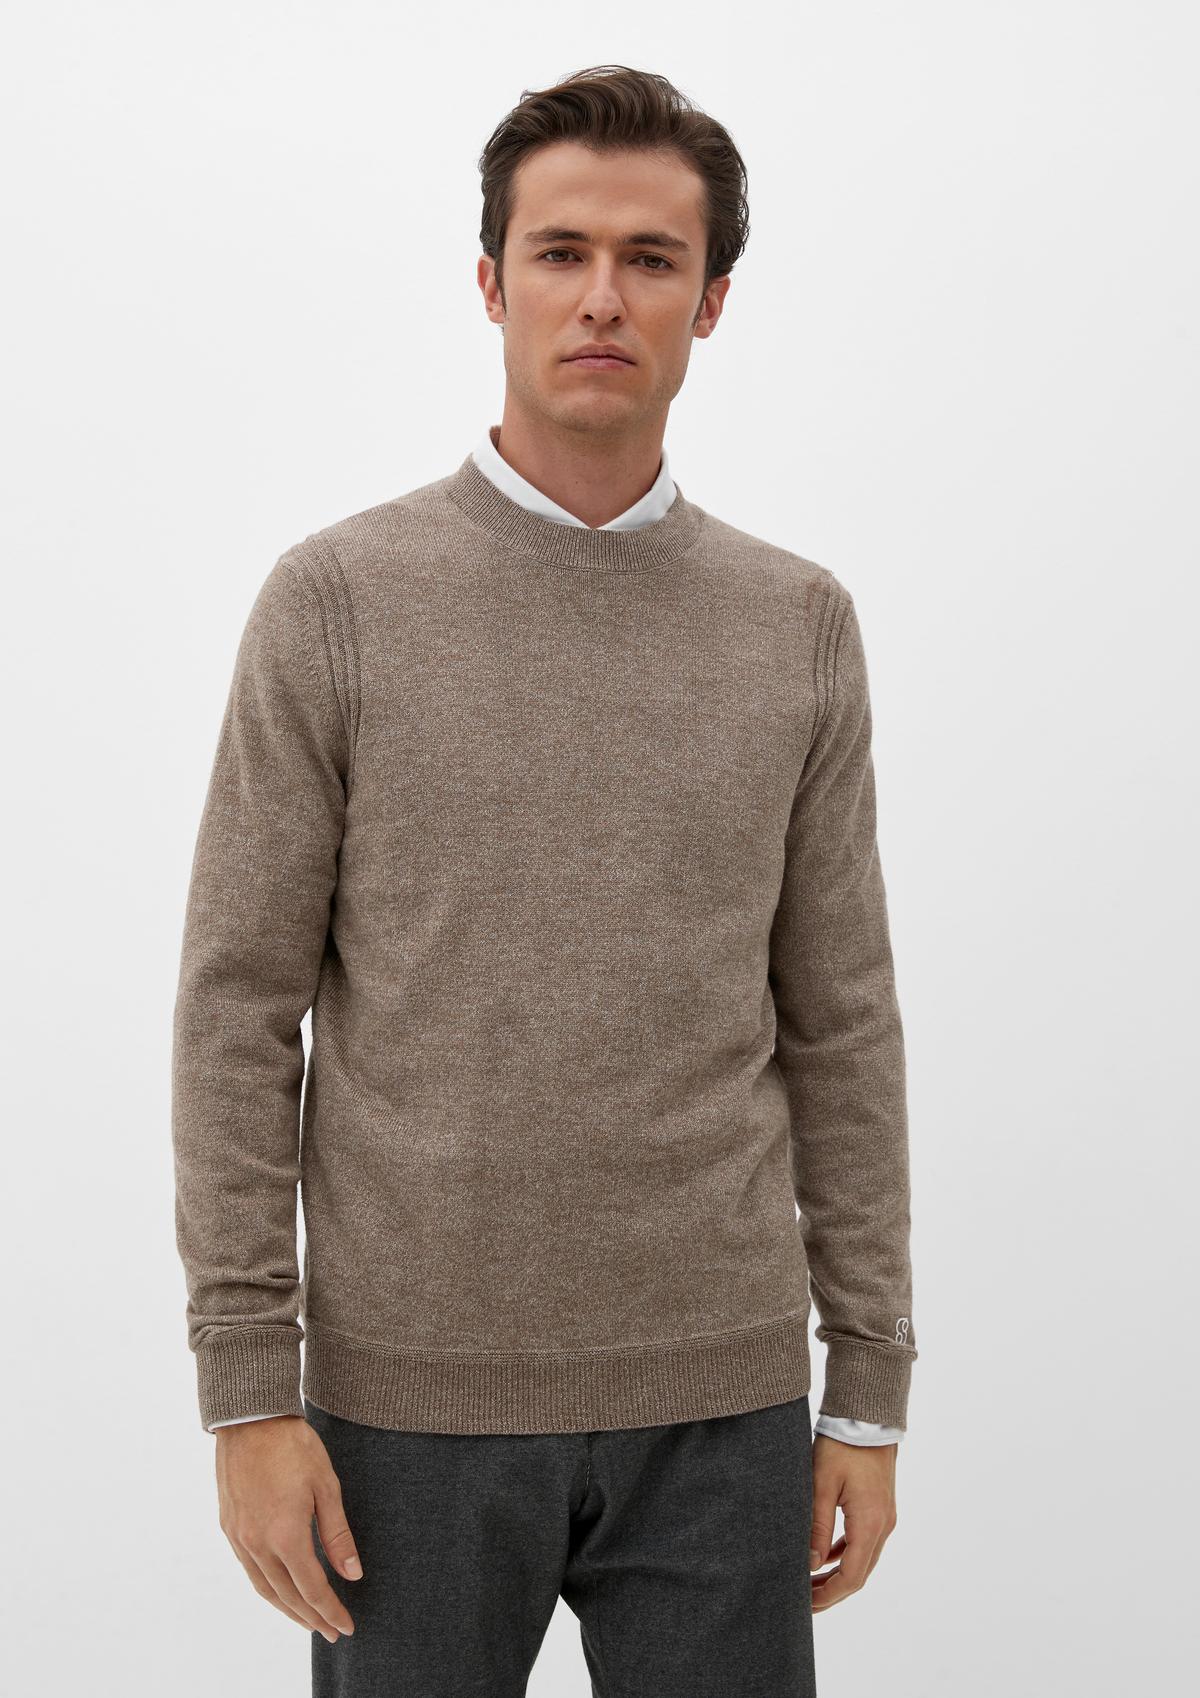 Fine knit jumper with ribbed details